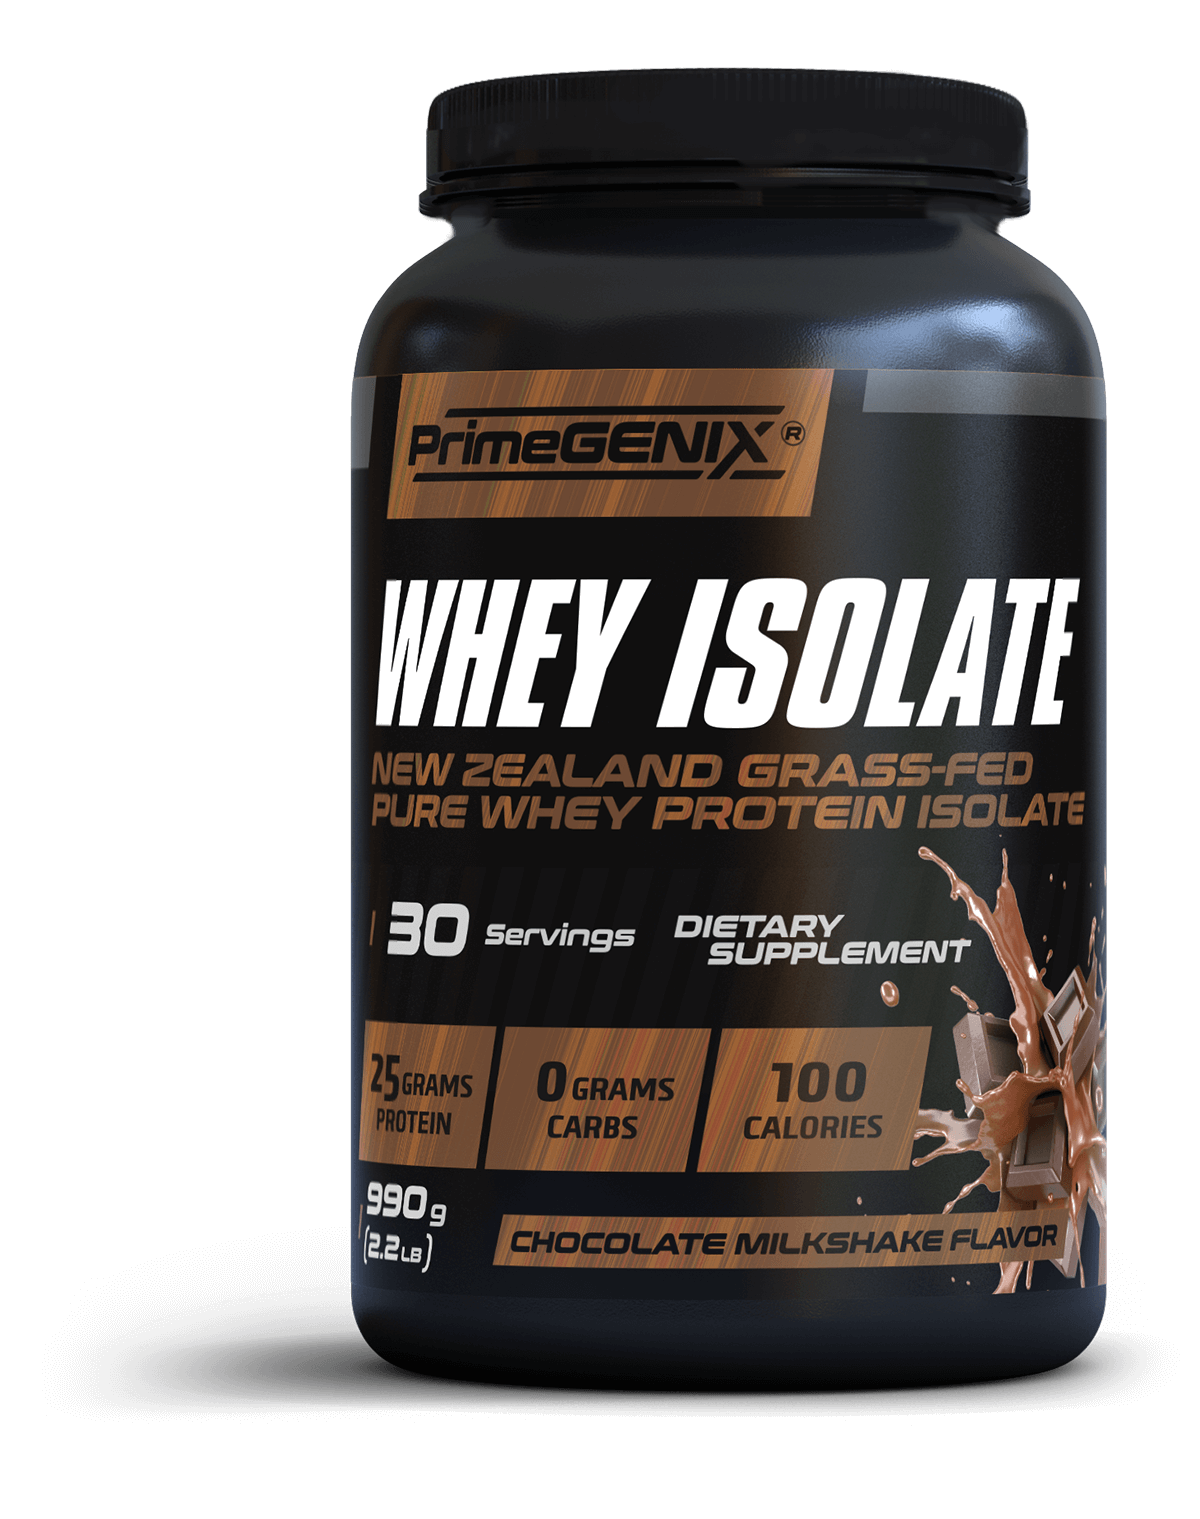 whey-isolate-pack